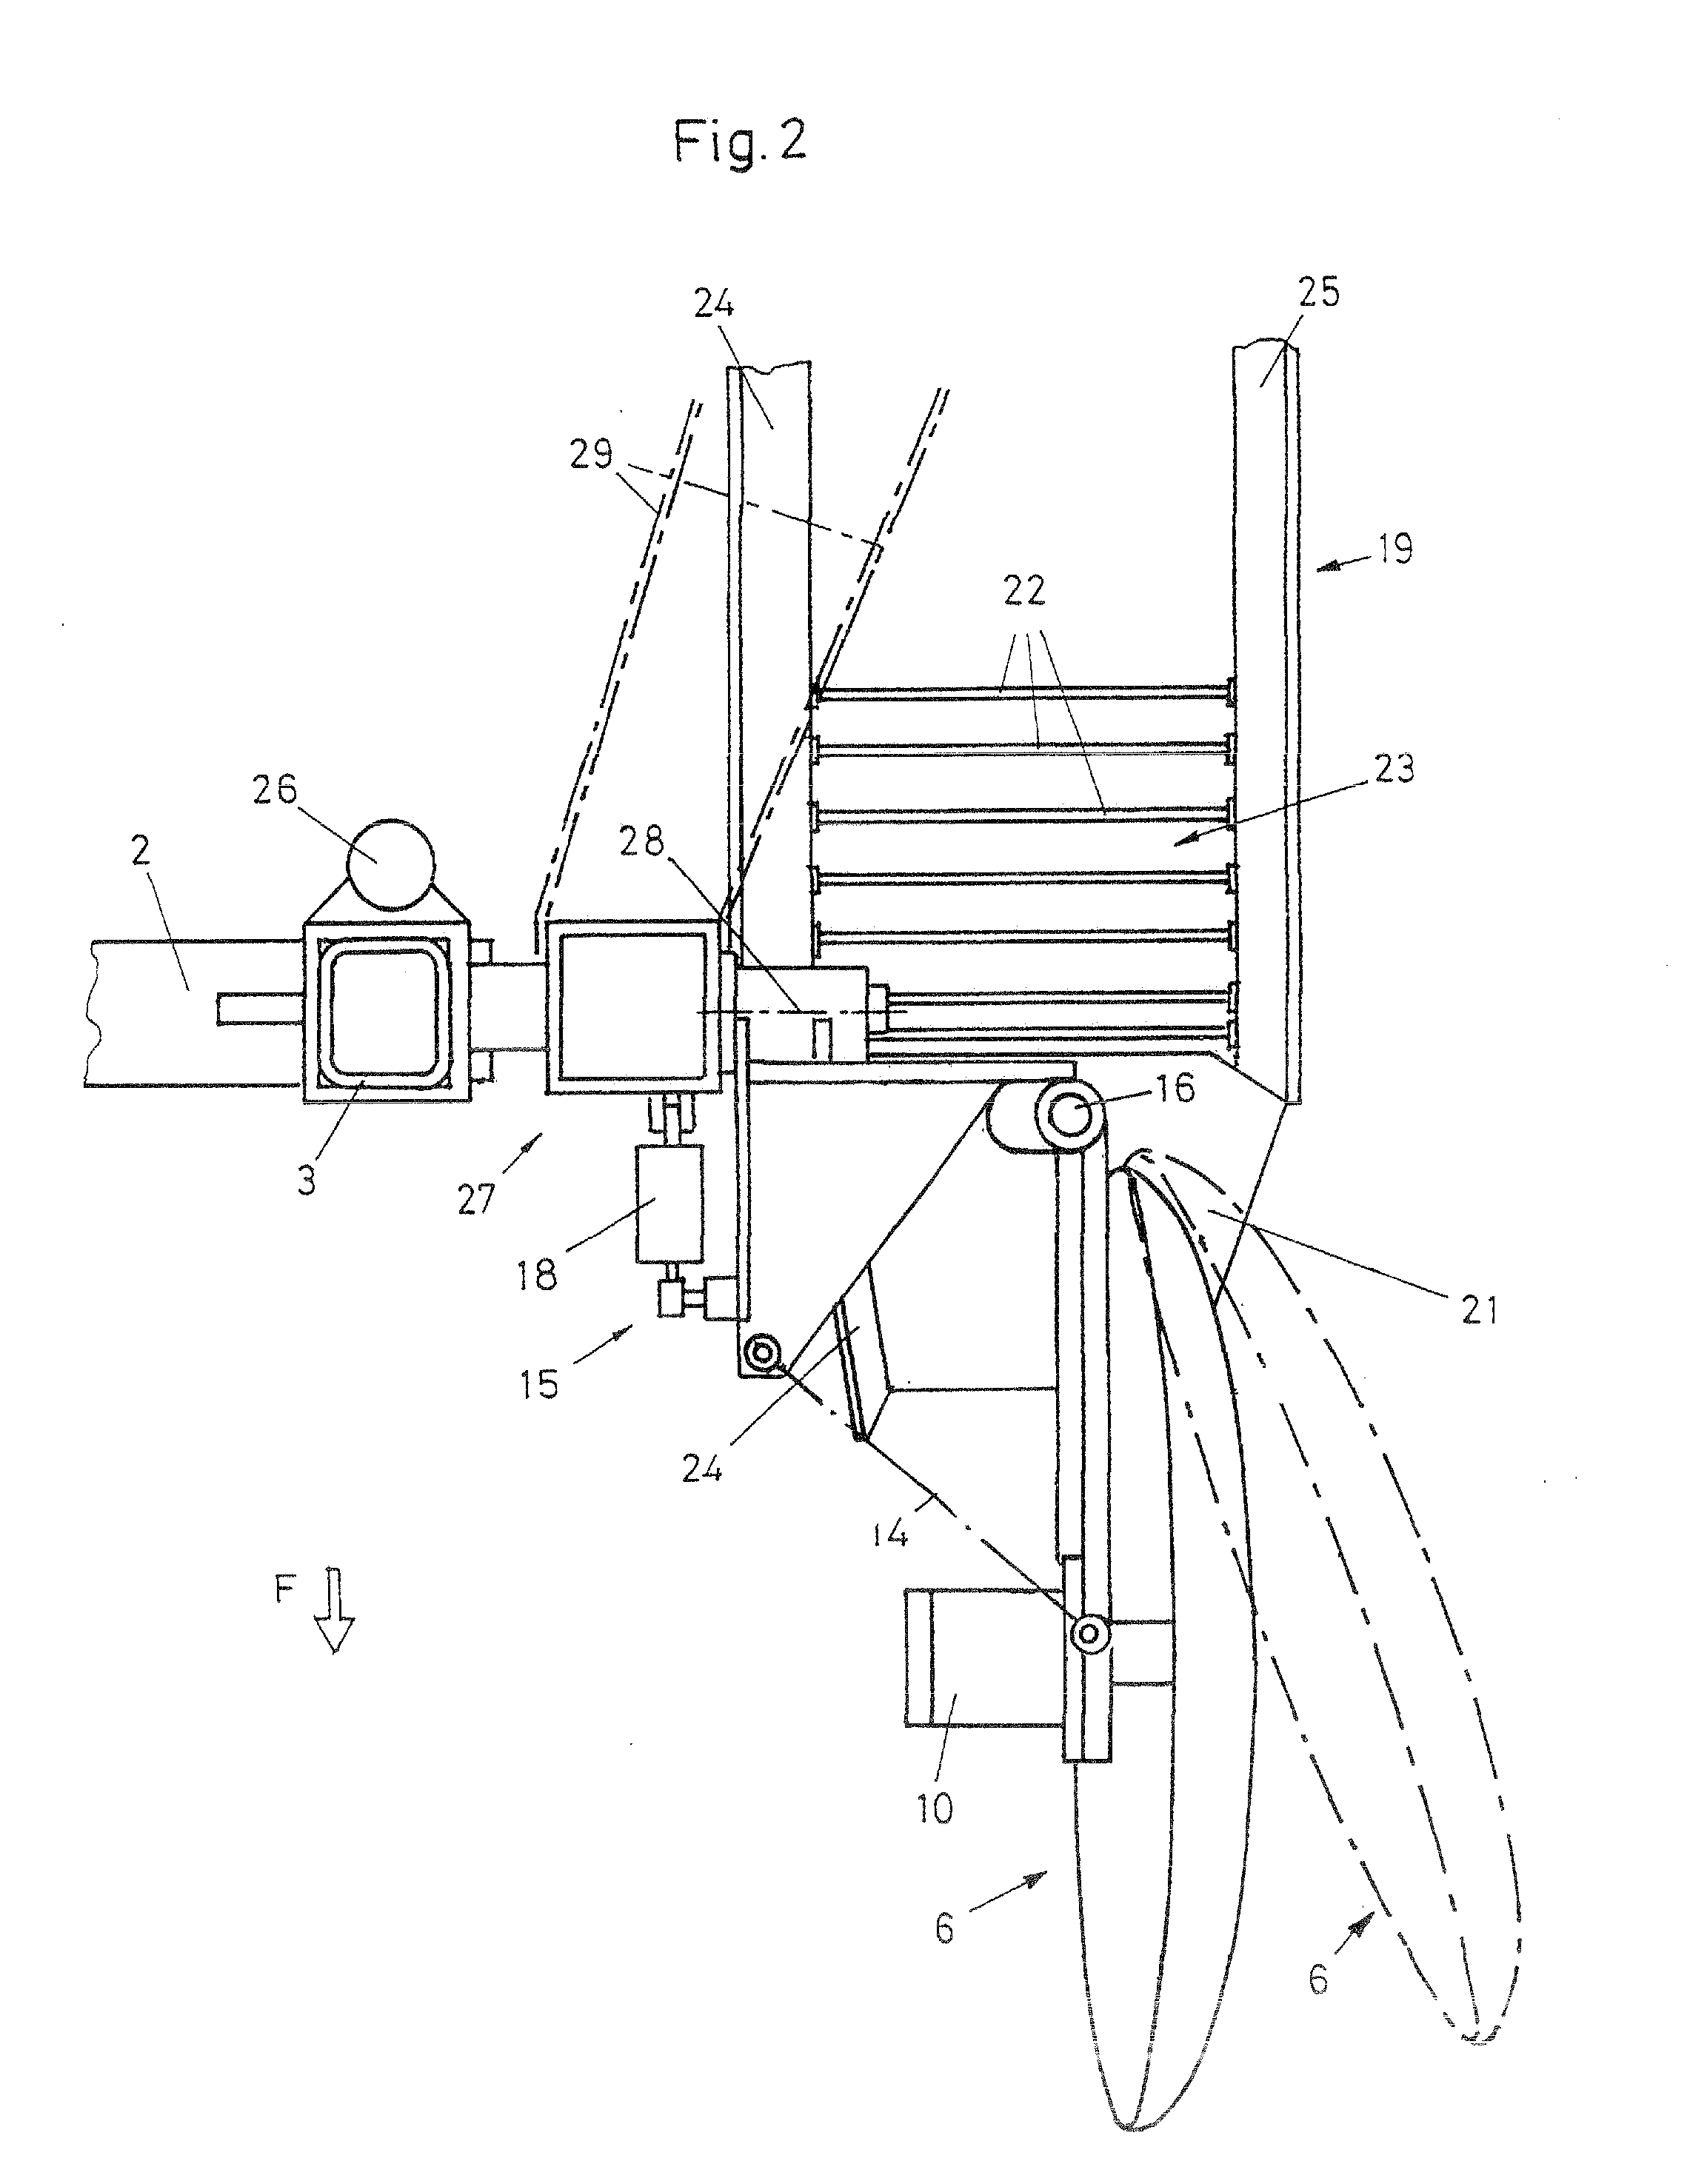 Method for mechanically processing or straightening an edge